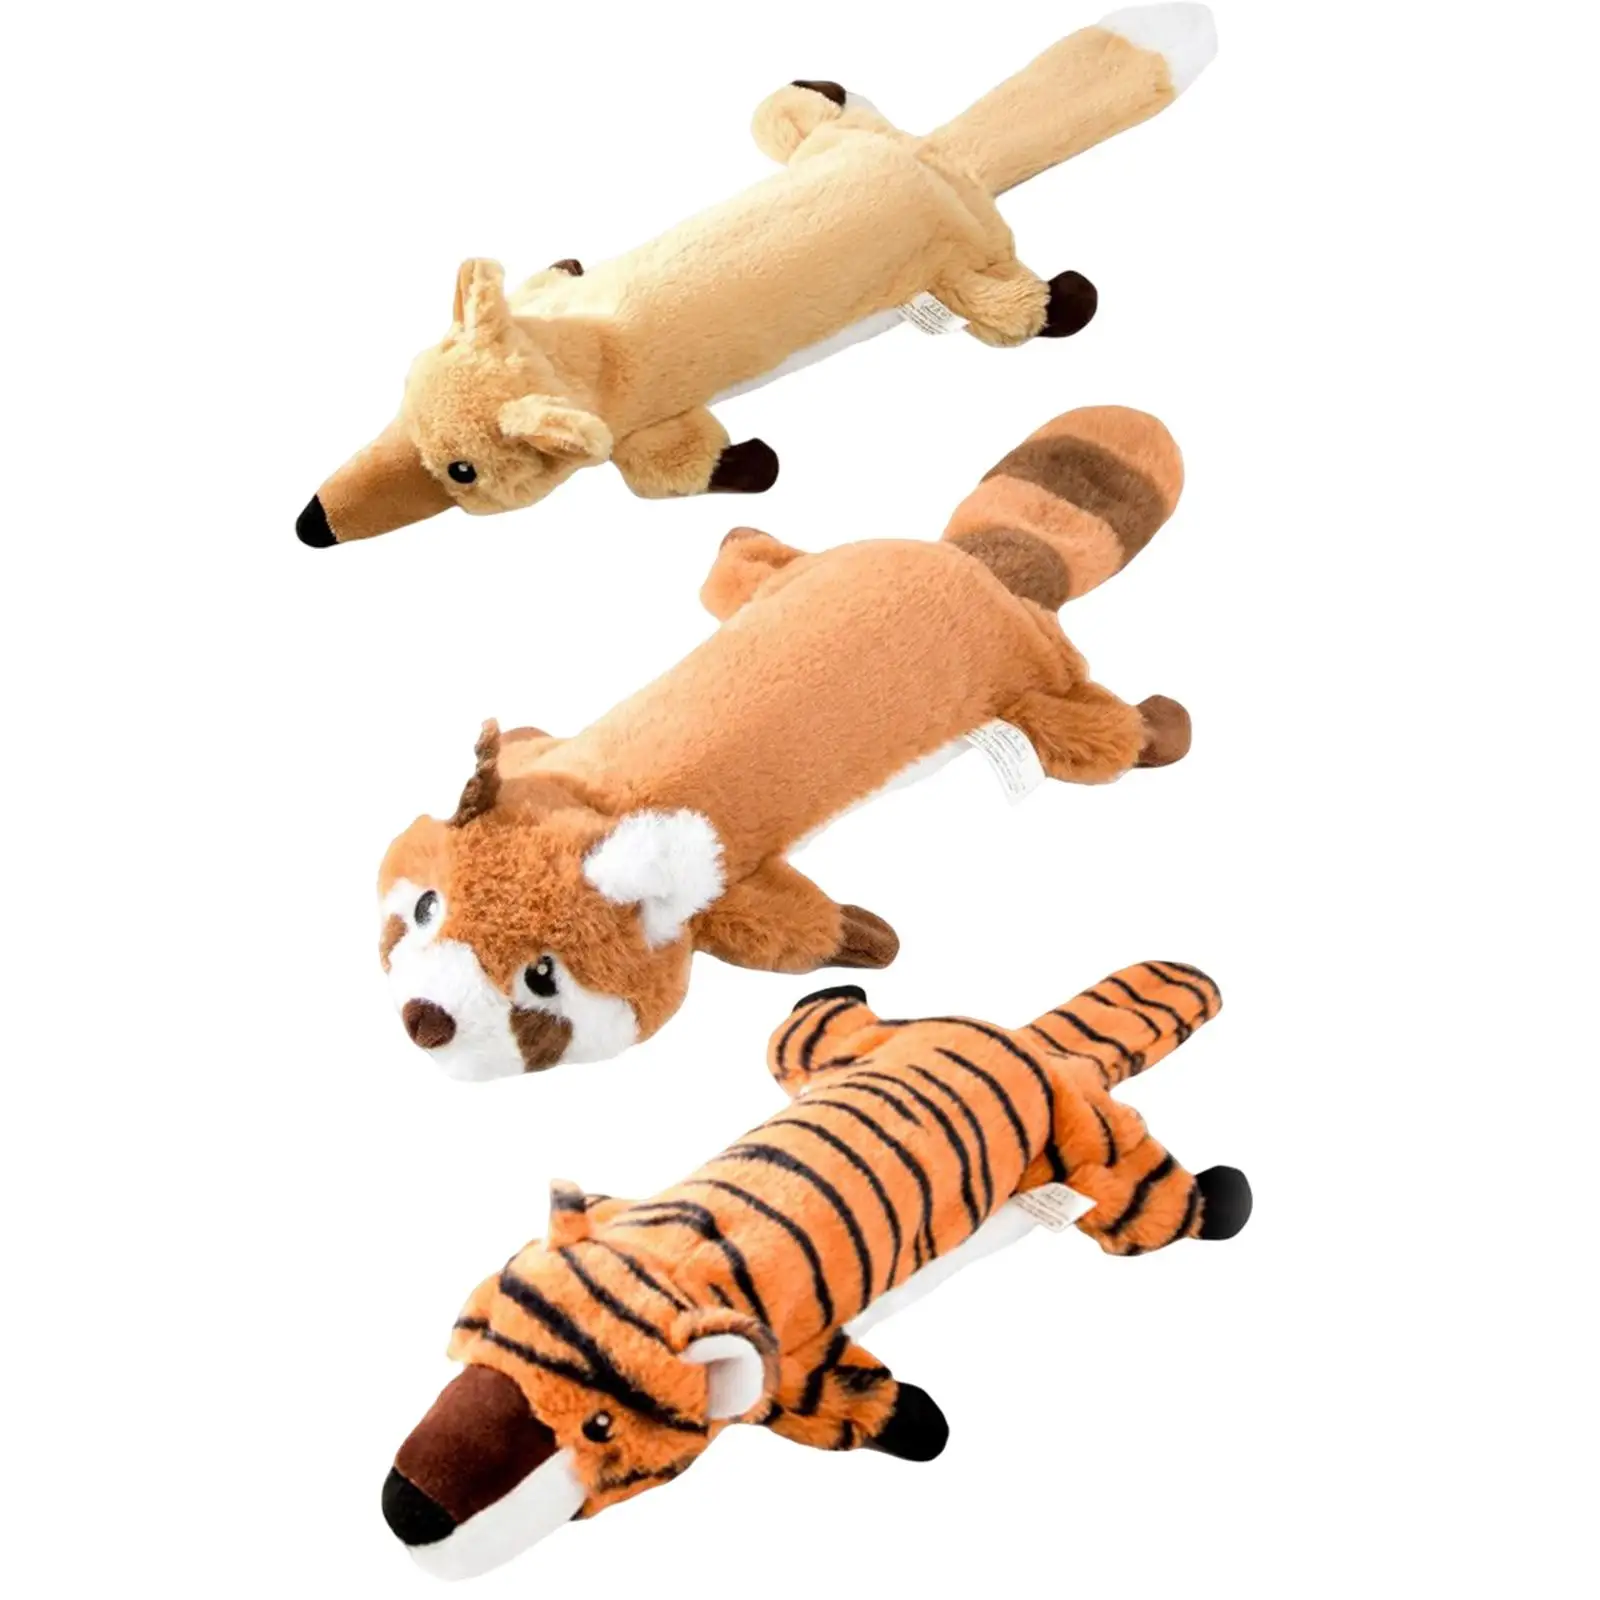 Stuffless Dog Squeaky Toys Plush Puppy Toys Interactive Dog Toys Pet Training and Entertaining Puppy Teething for Medium Dogs